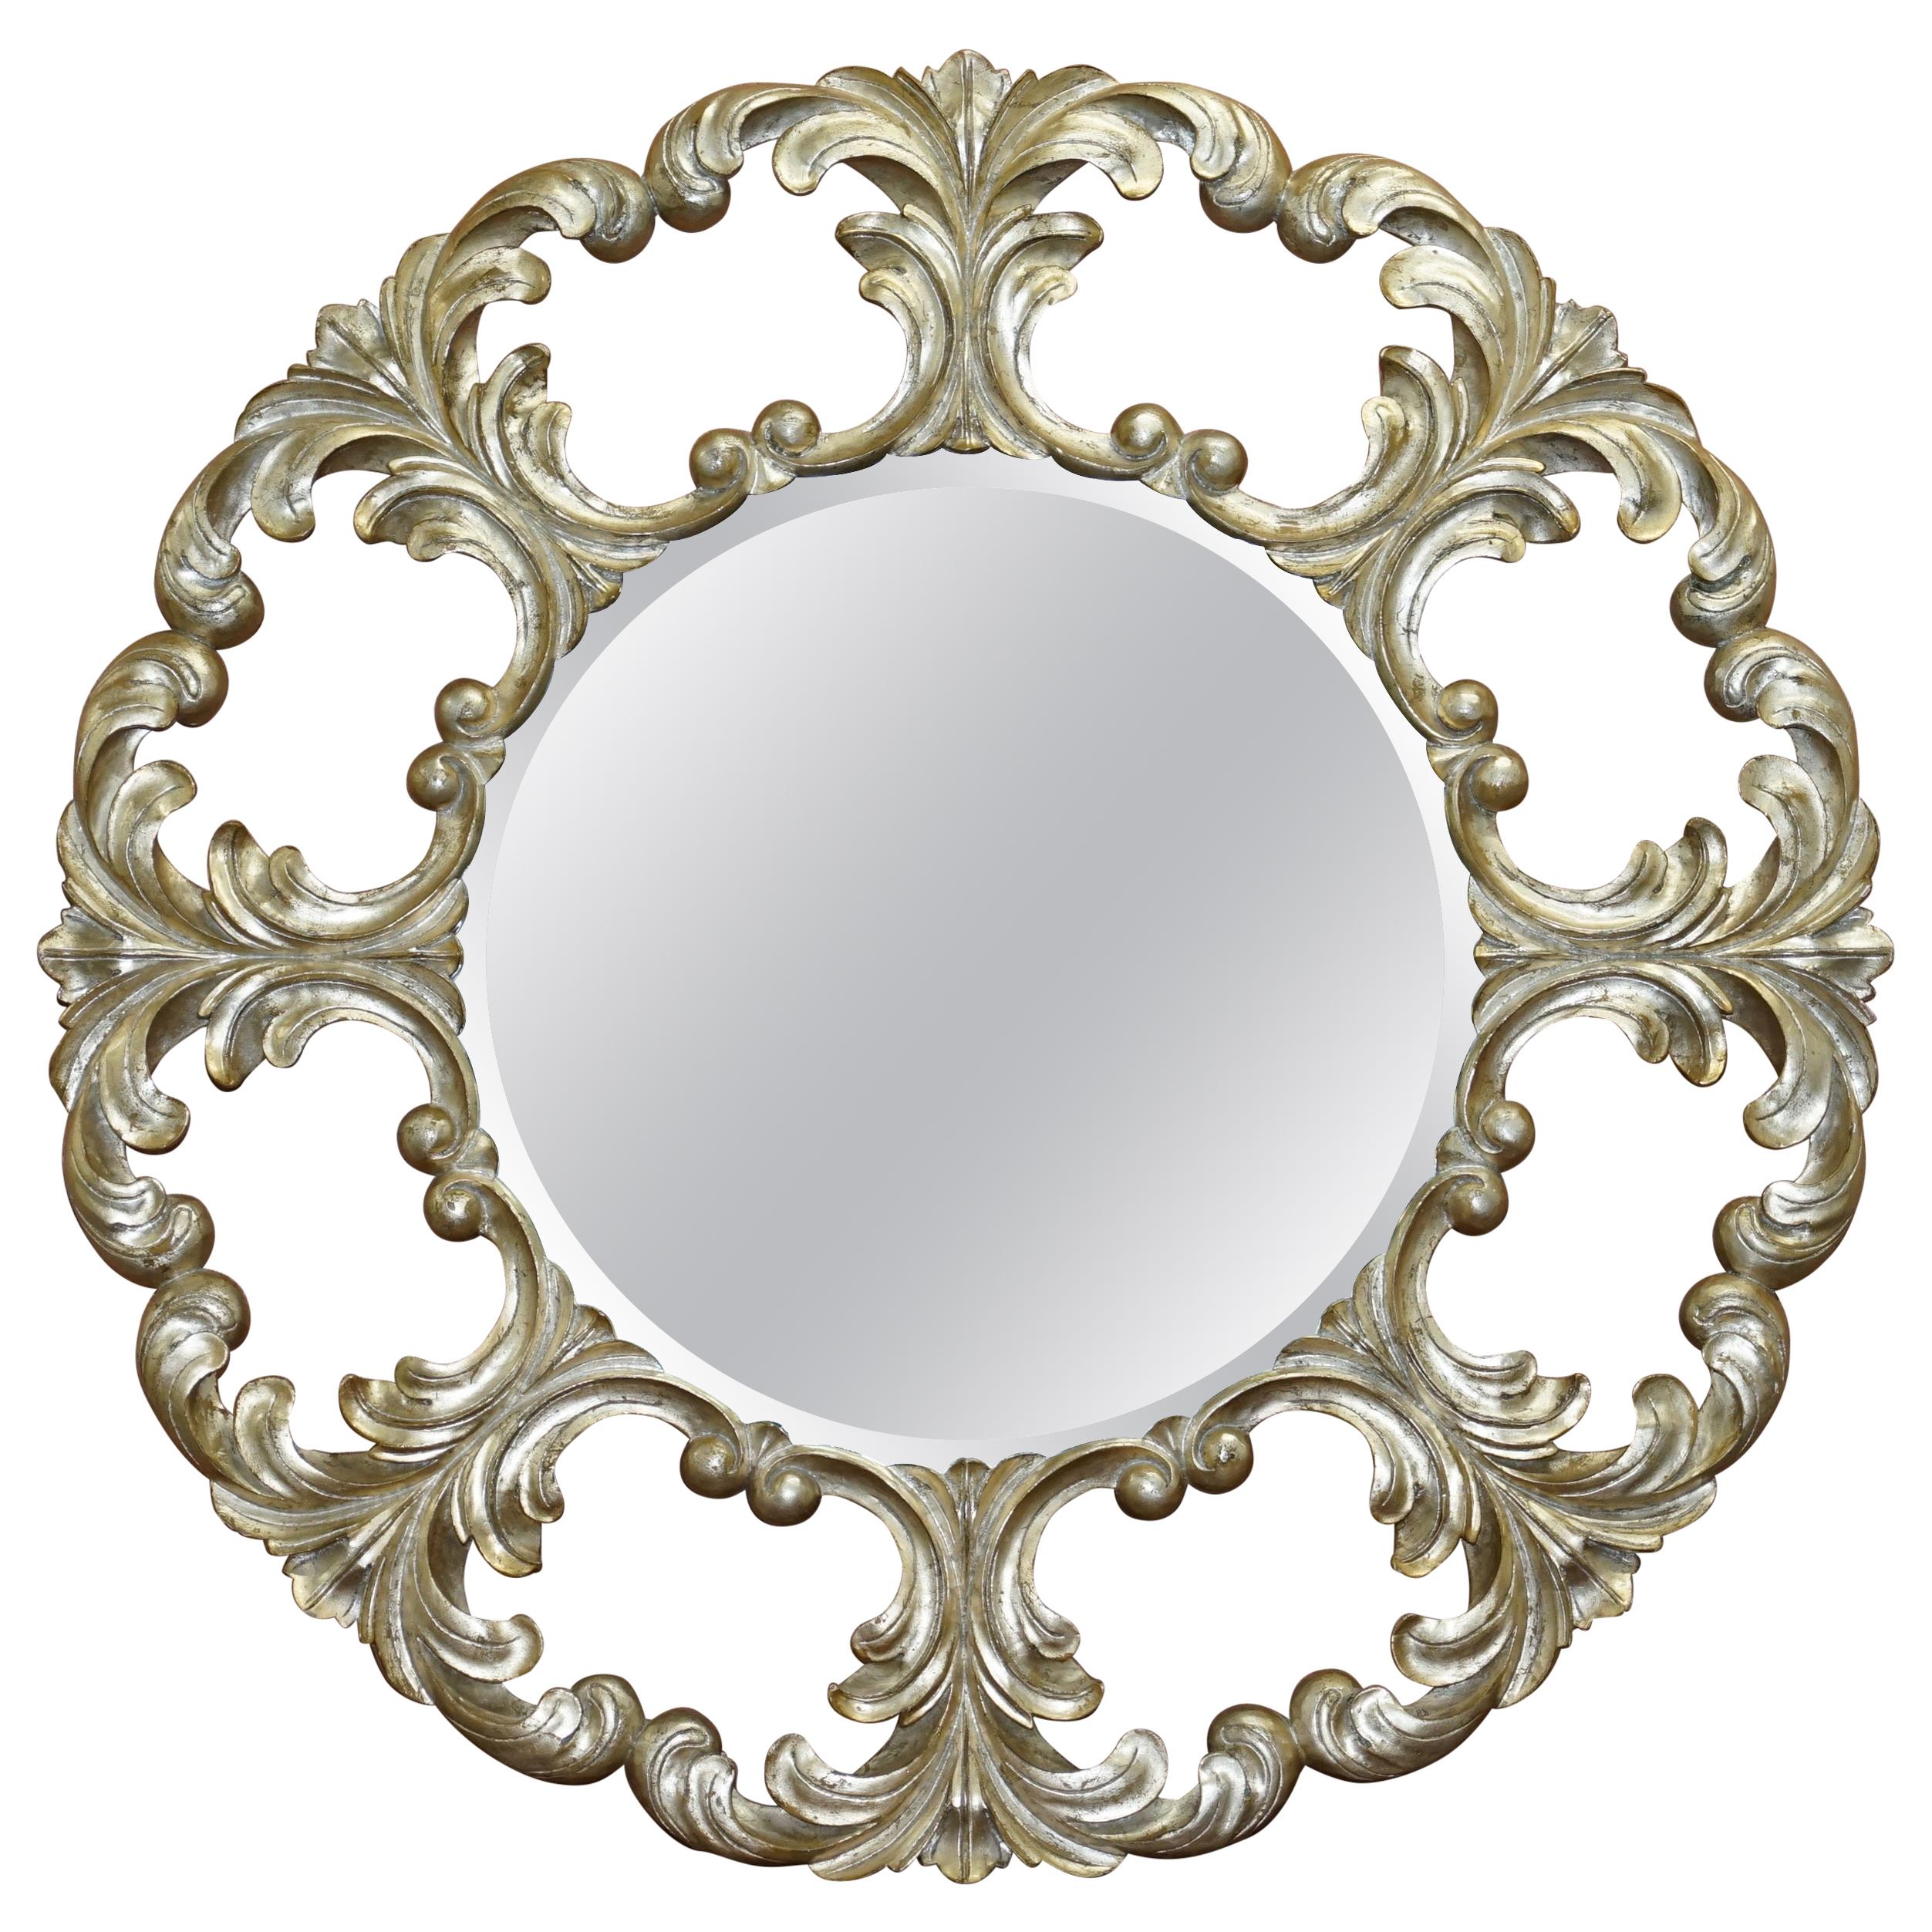 1 of 2 Christopher Guy Gold and Silver Leaf Giltwood Wall Mirrors For Sale